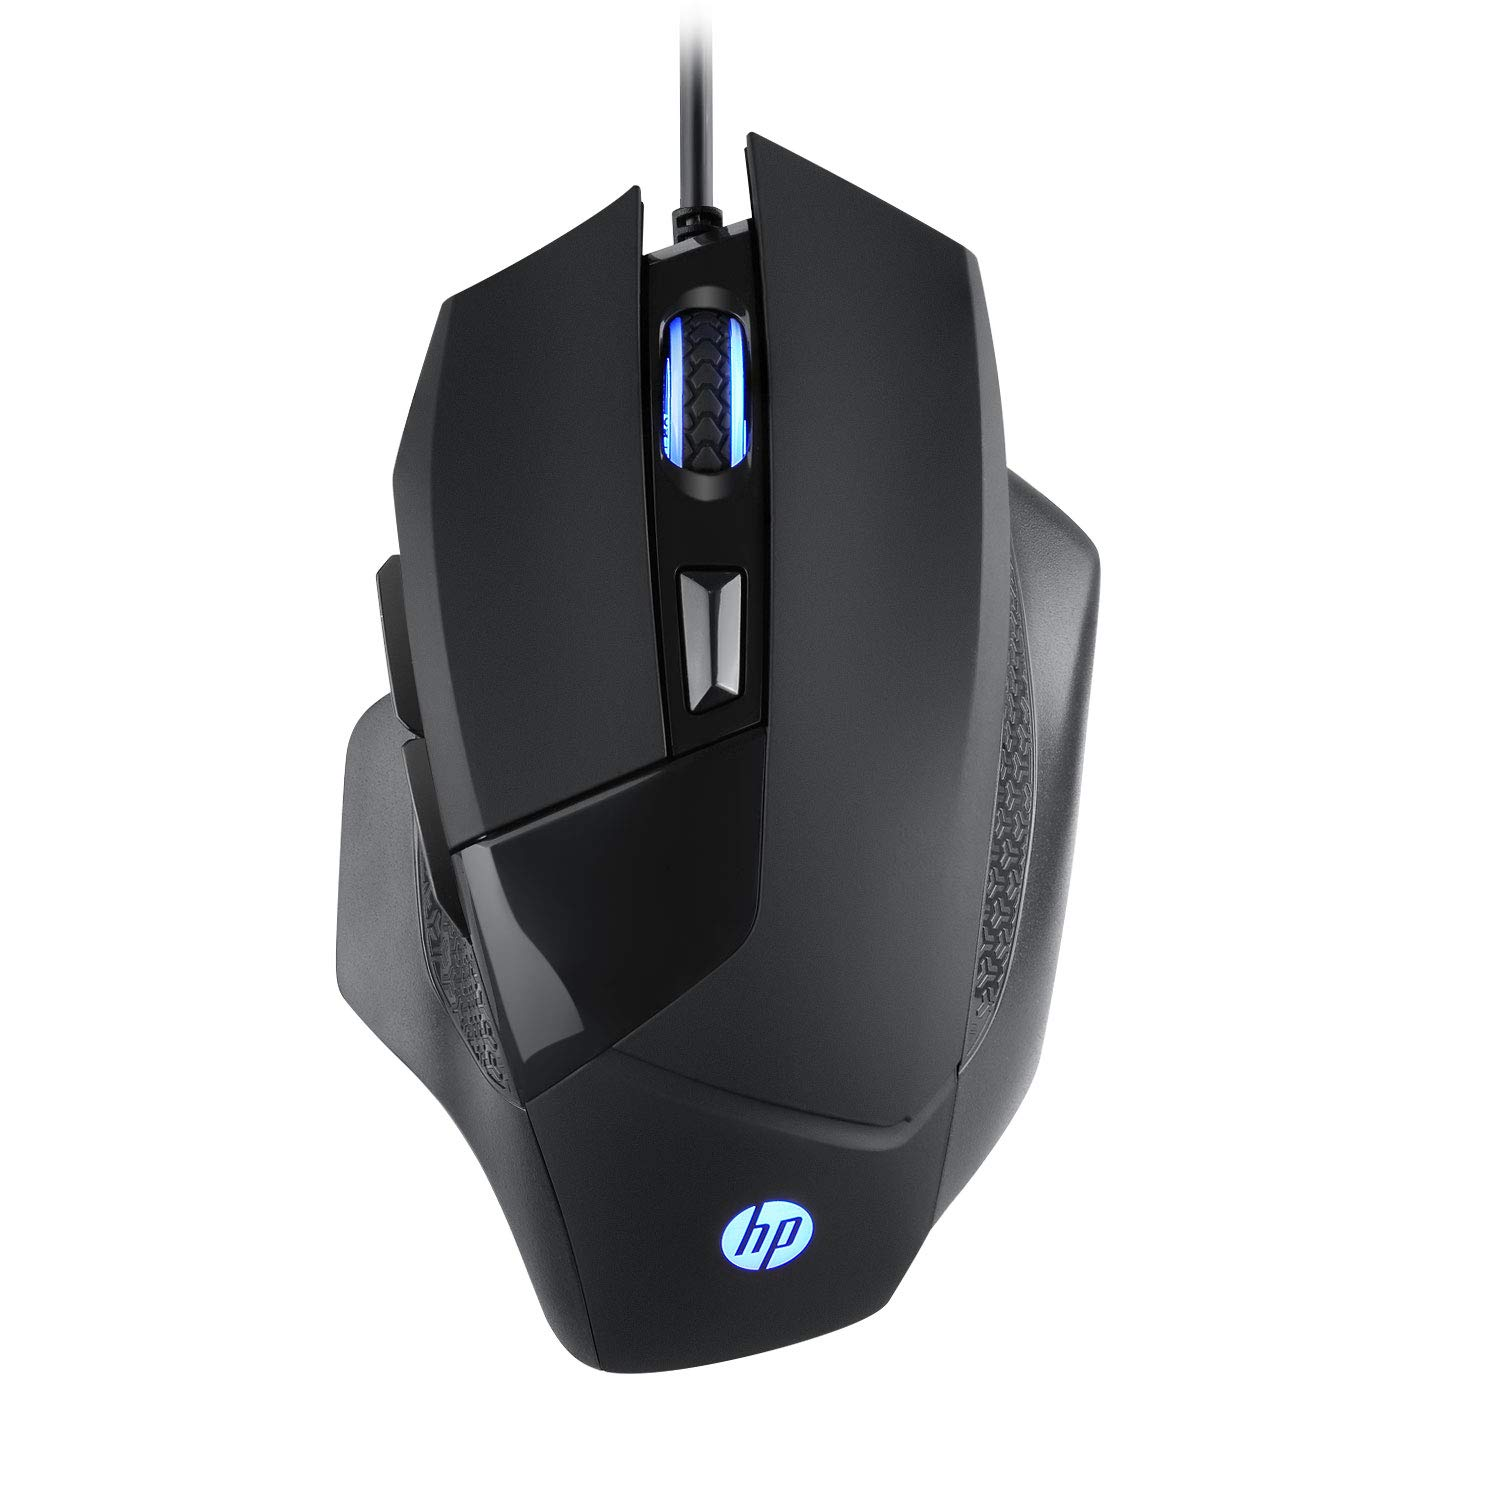 HP G200 Mouse